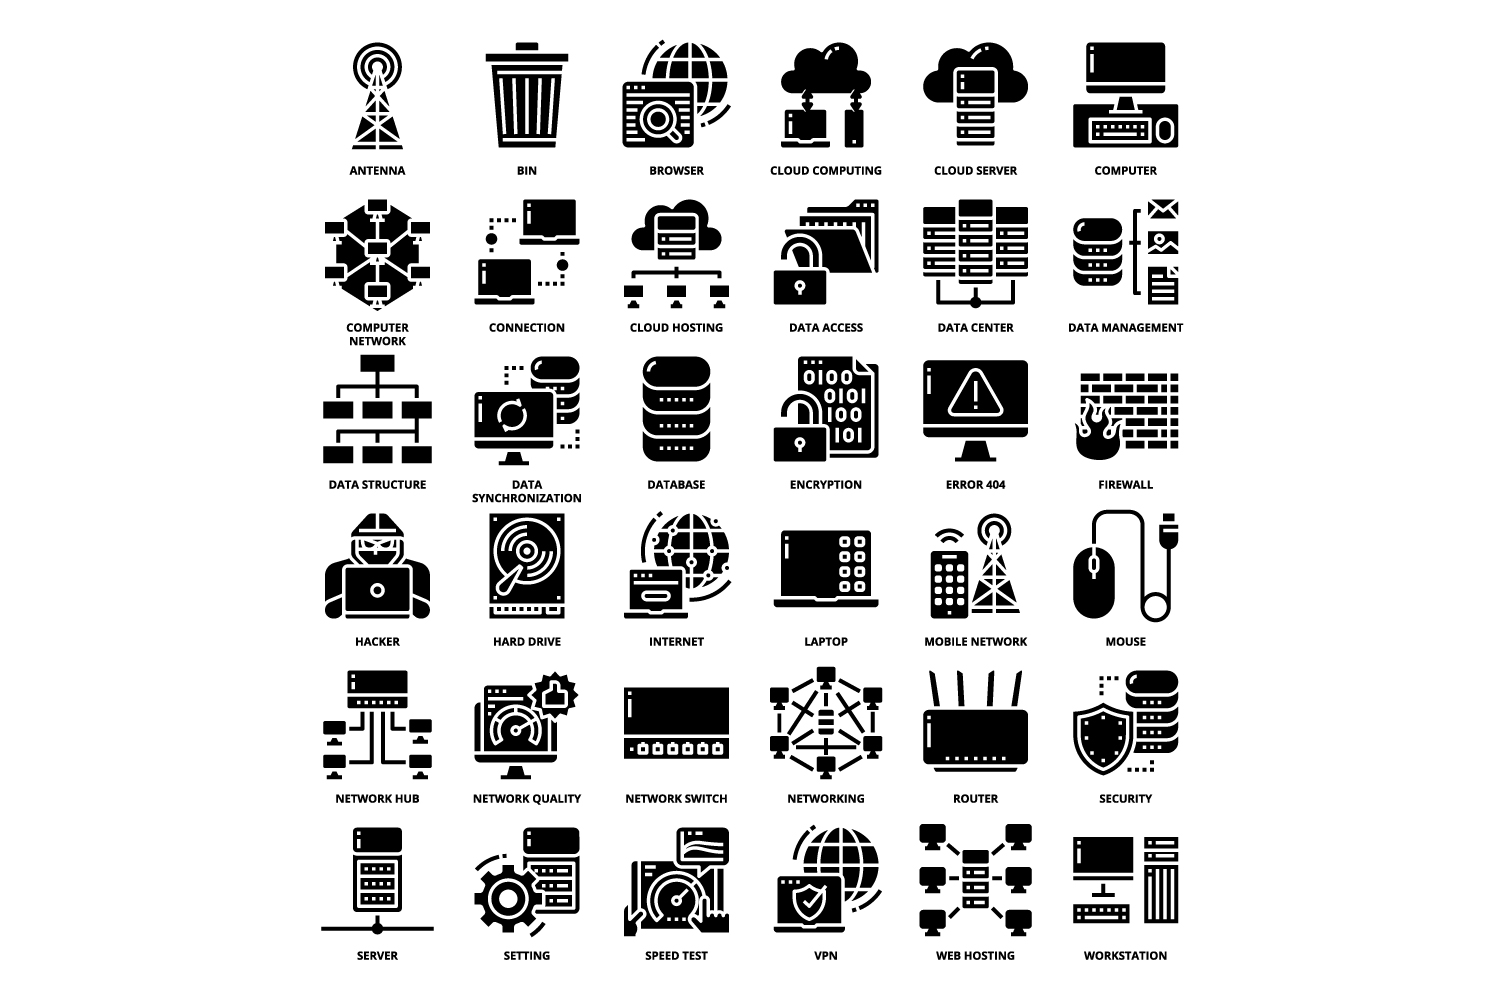 Series of black and white icons depicting different types of computers.